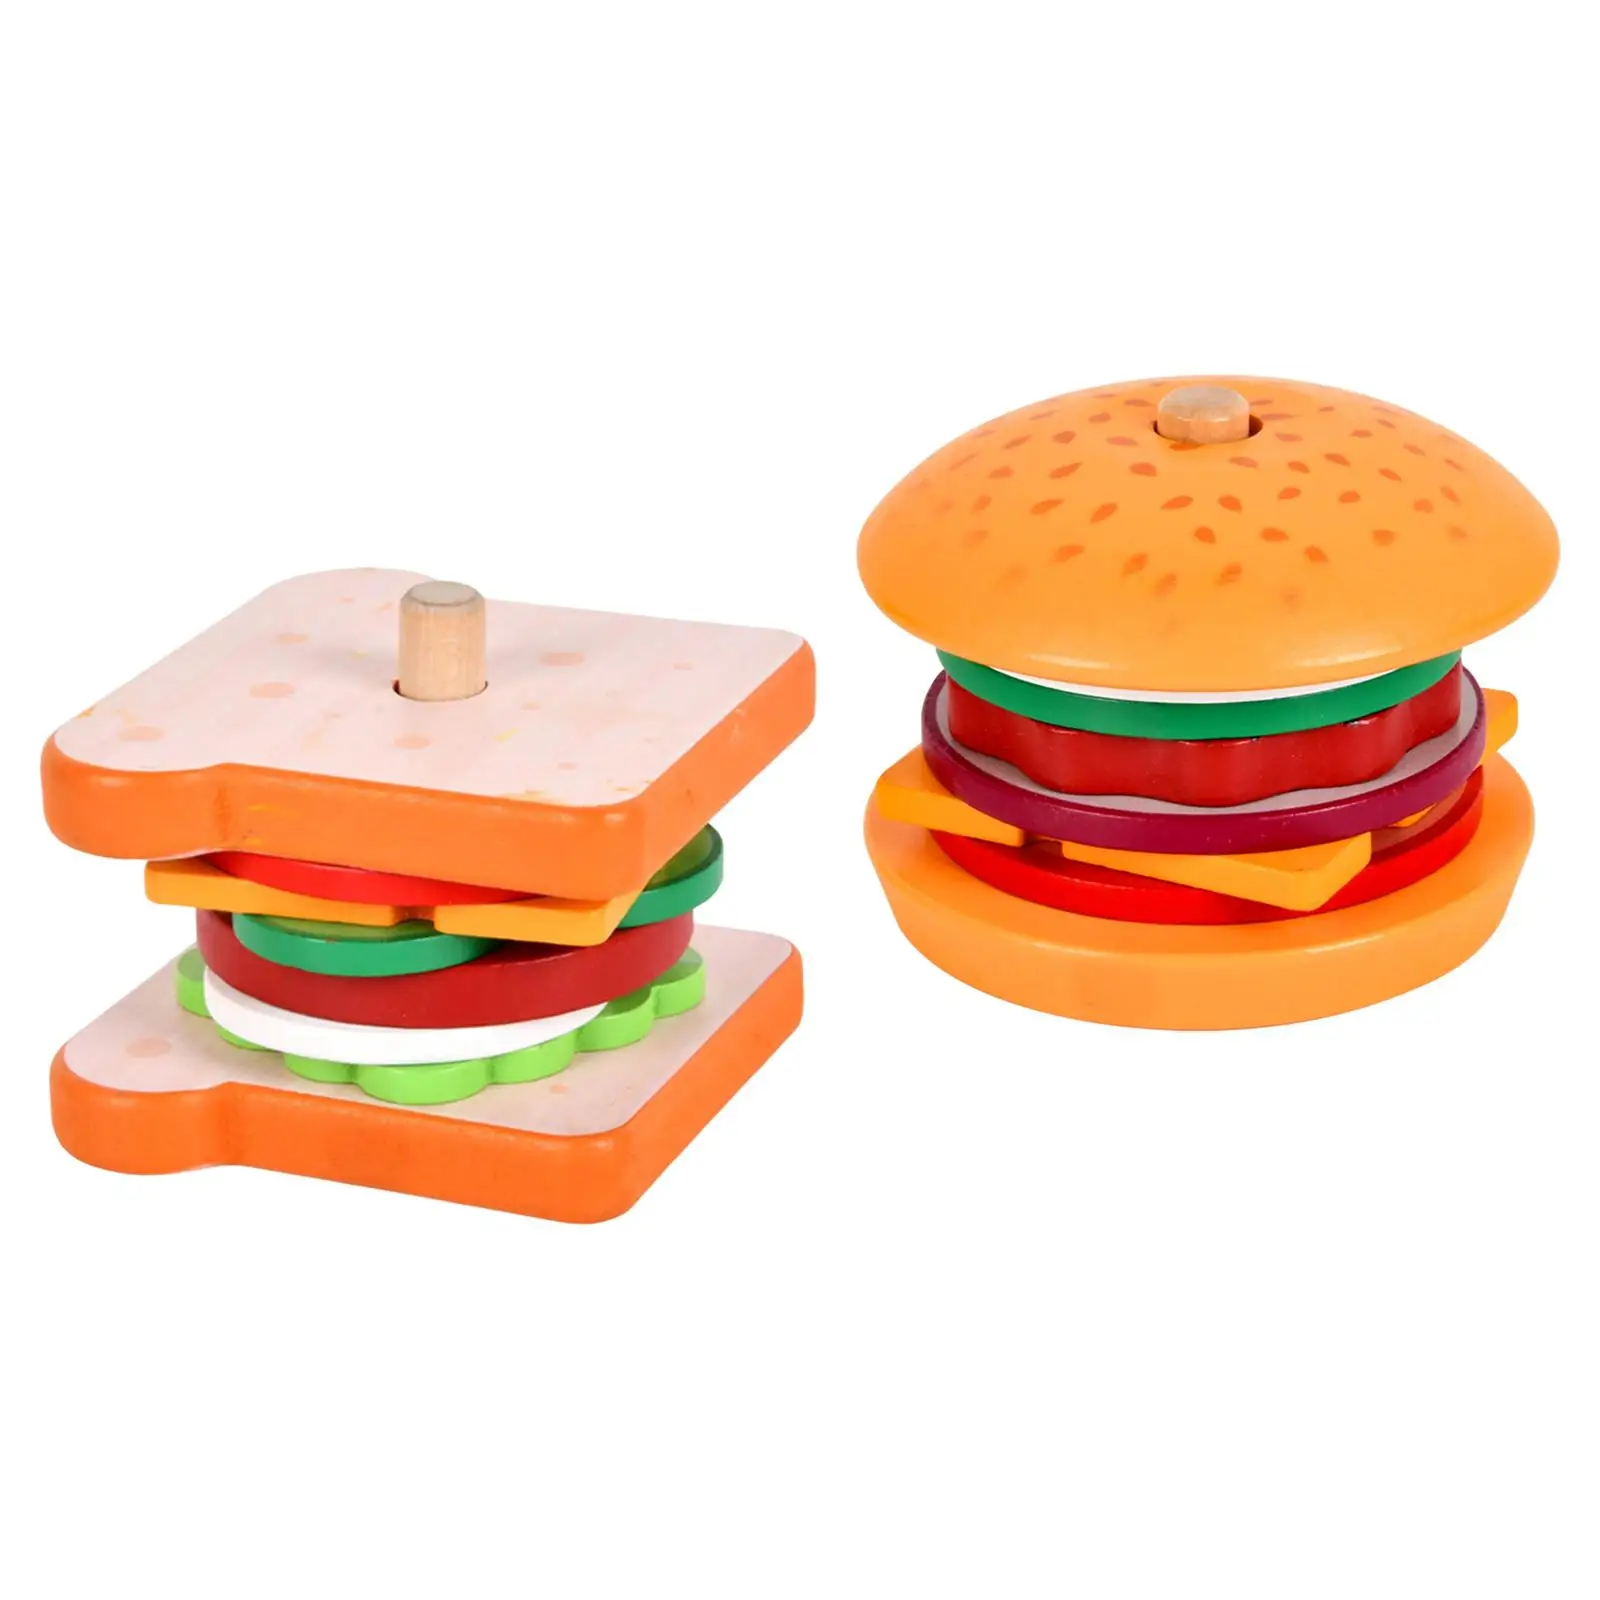 Pretend Food Stacking Wooden Toy with Order Cards Learning Activity Matching Fine Motor Skills Game